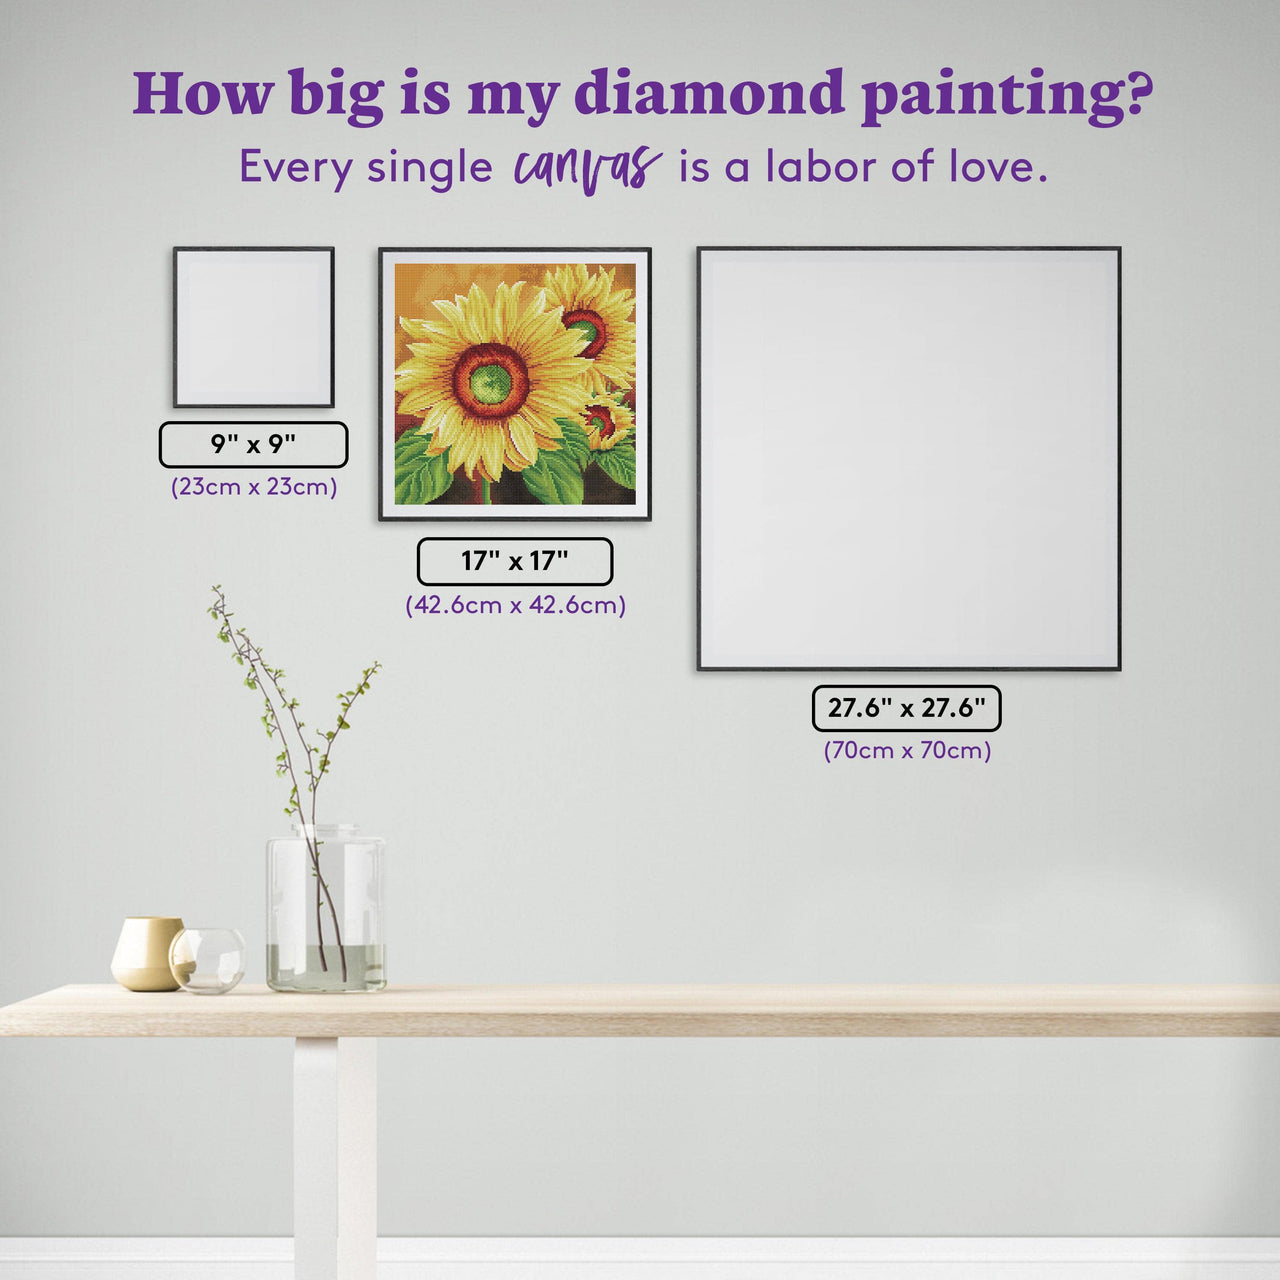 Diamond Painting We Are Sun 17" x 17" (42.6cm x 42.6cm) / Round with 25 Colors including 3 ABs / 23,104